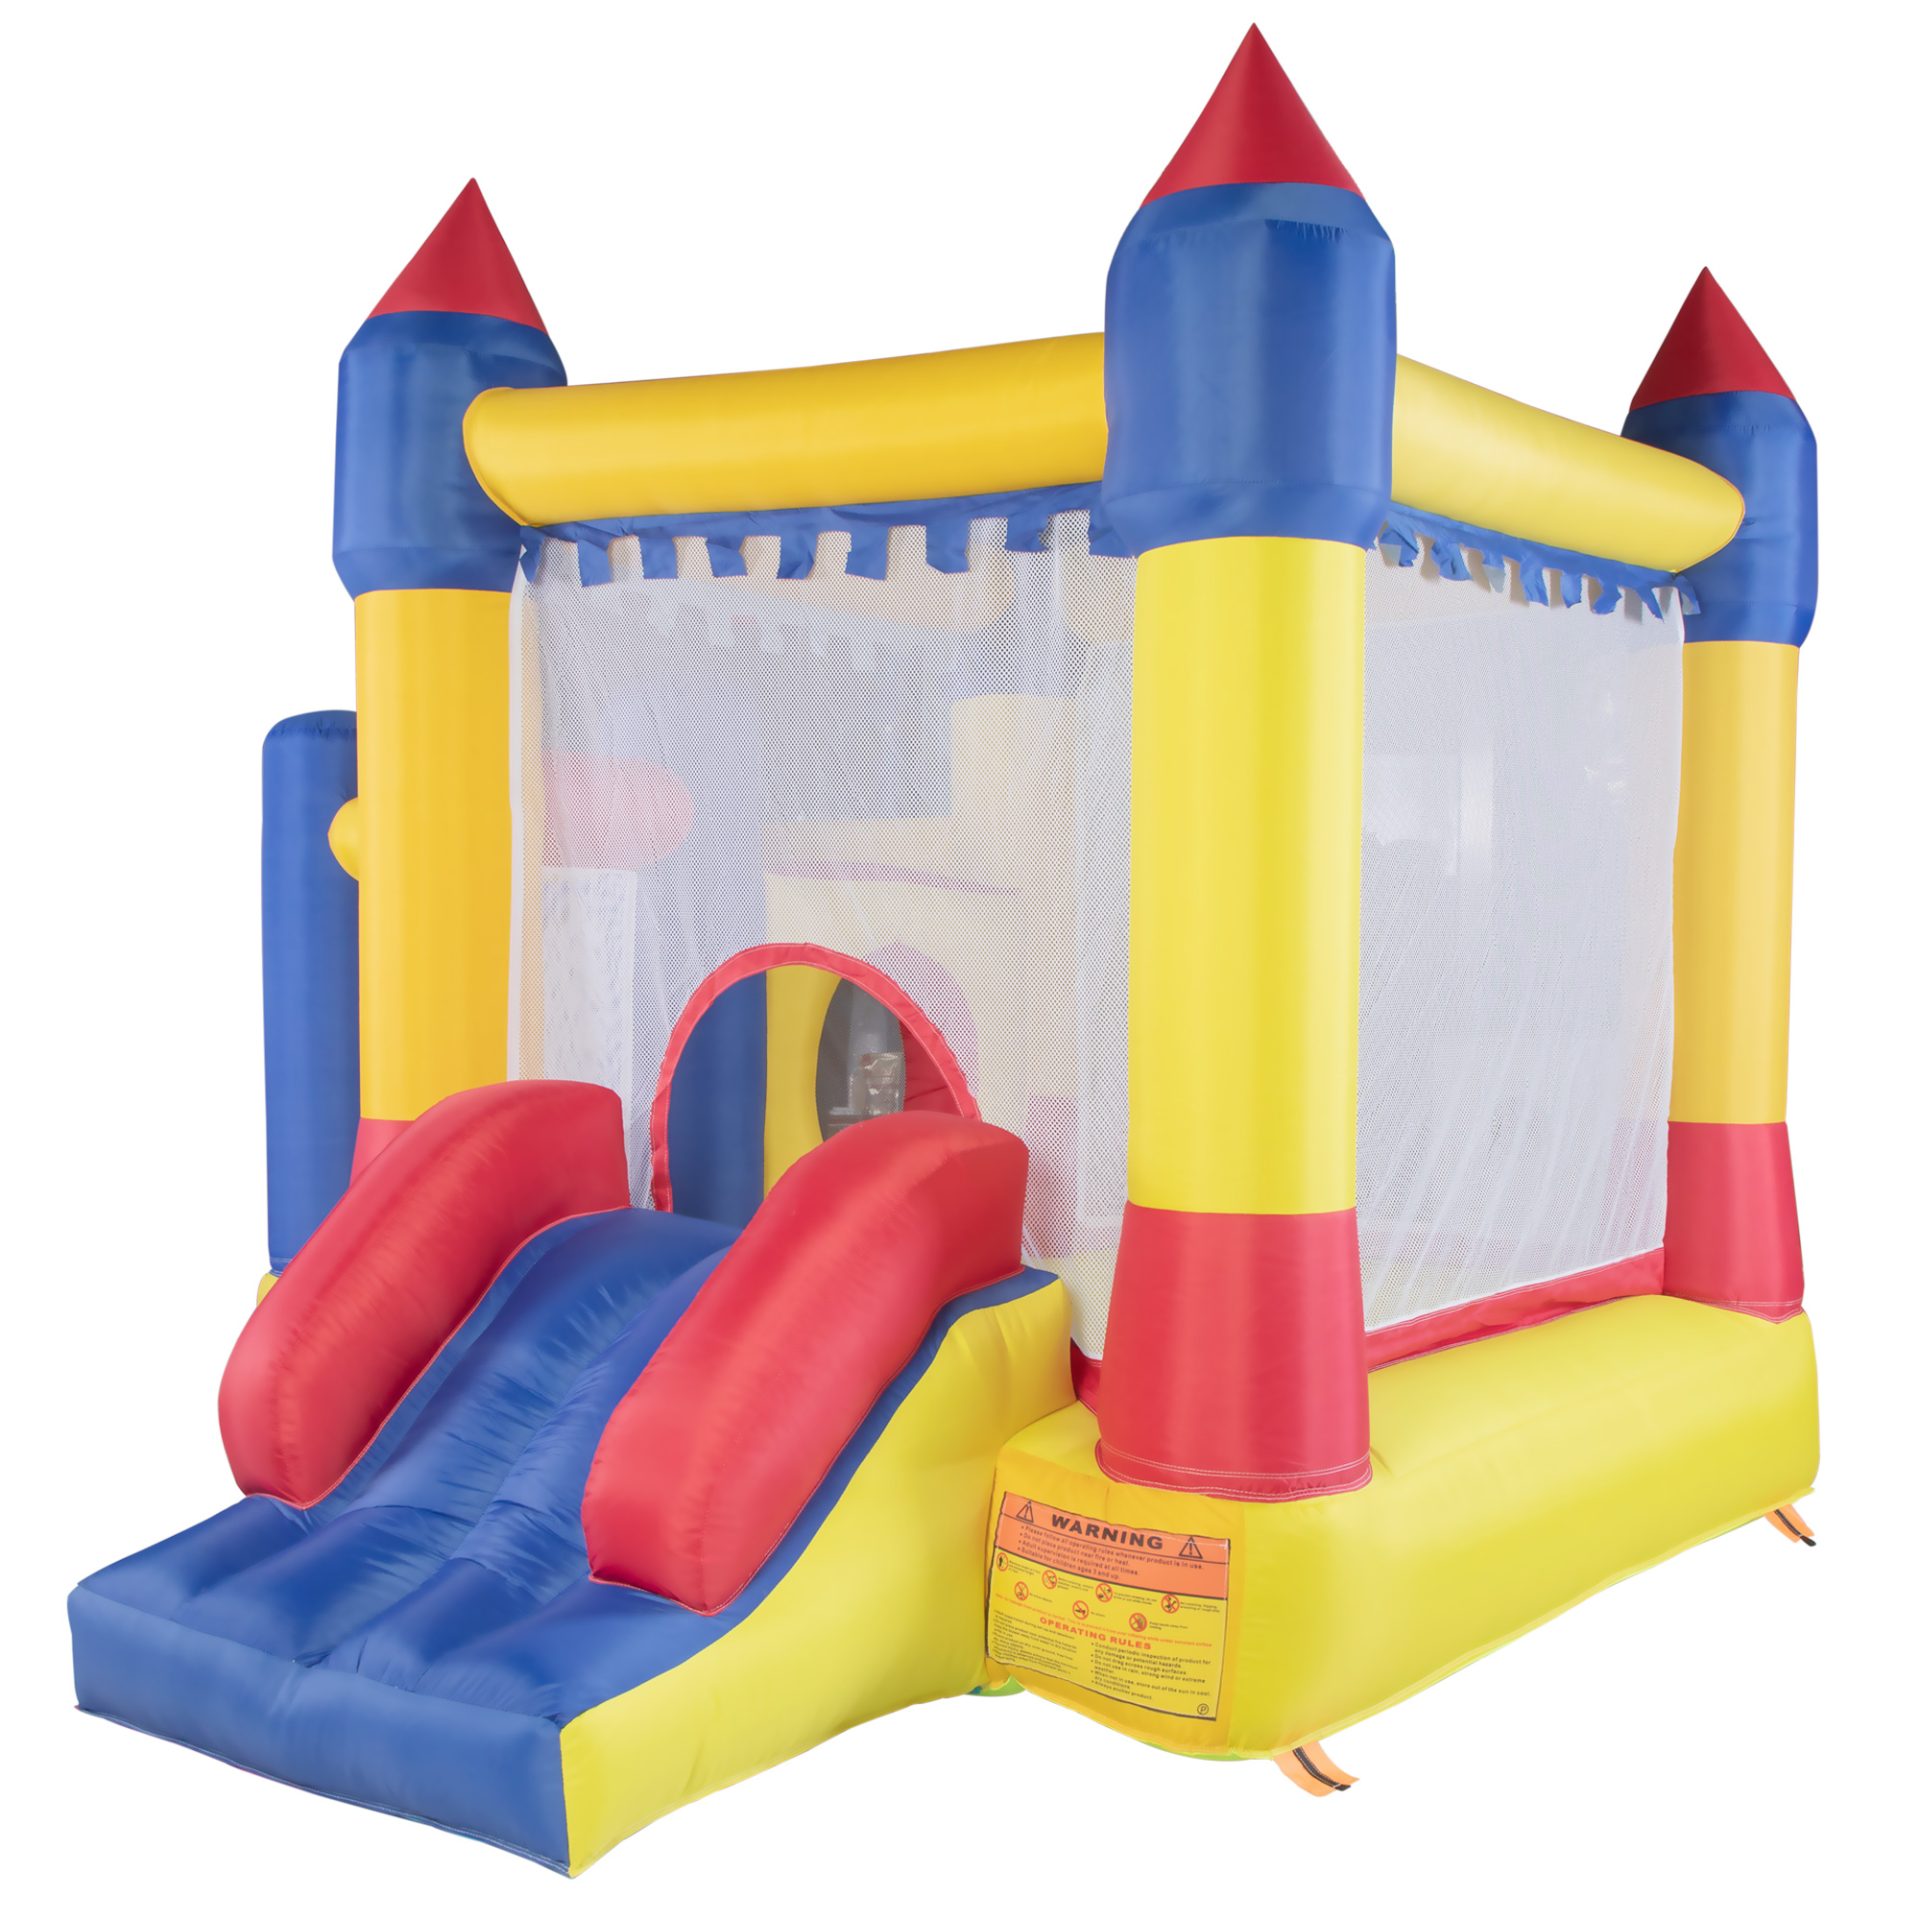 Nyeekoy Inflatable Bounce House, Kid Jump and Slide Castle Bouncer with Trampoline, Mesh Wall and Shooting Area, for Children 3-10 (Without Blower) TH17P0167 3